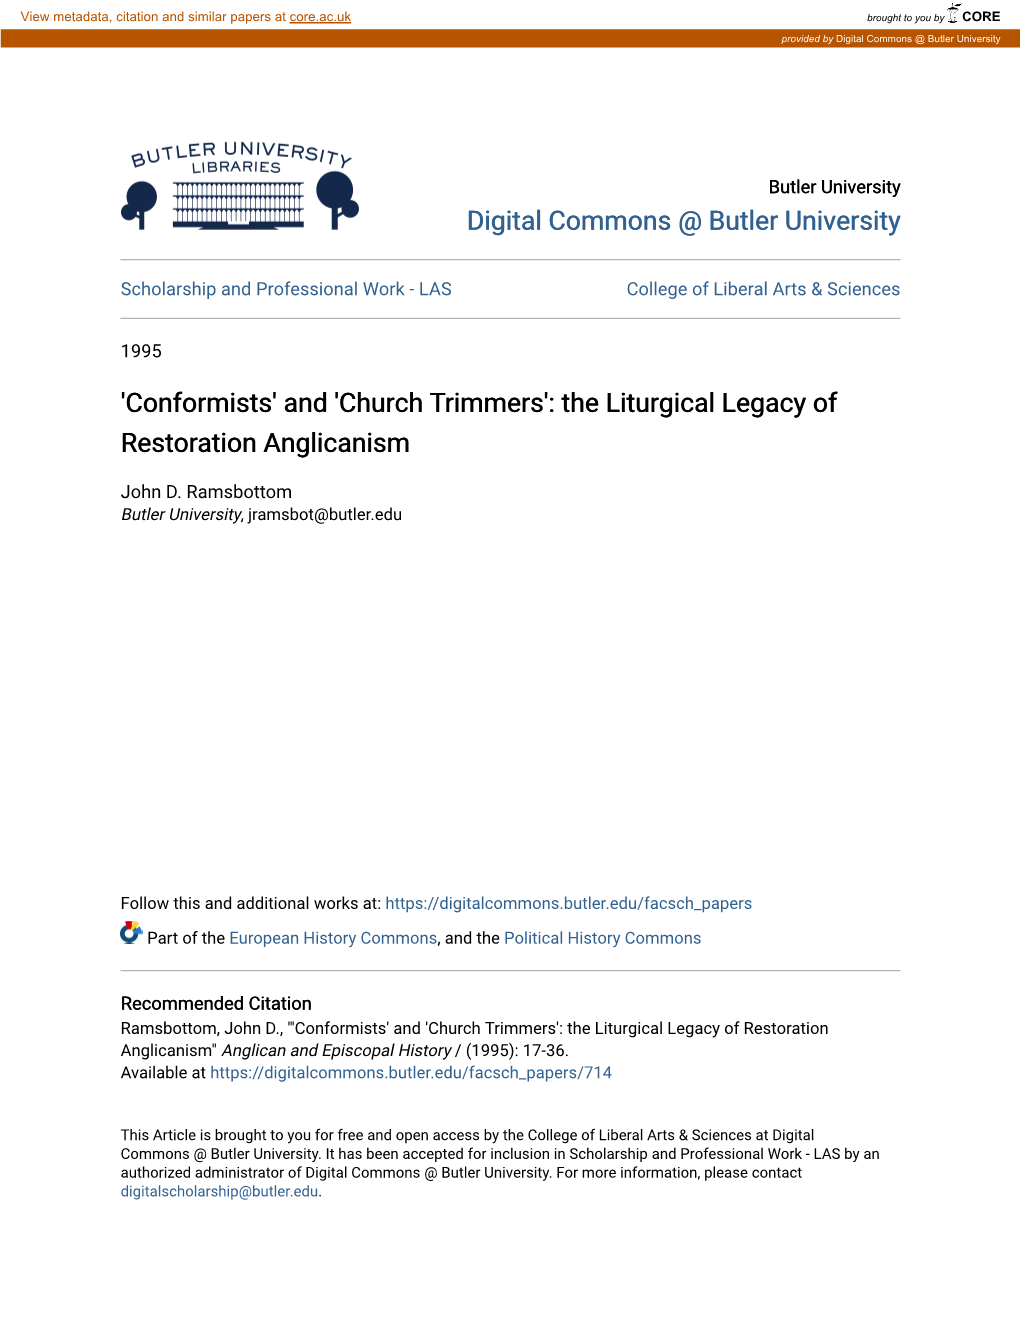 And 'Church Trimmers': the Liturgical Legacy of Restoration Anglicanism